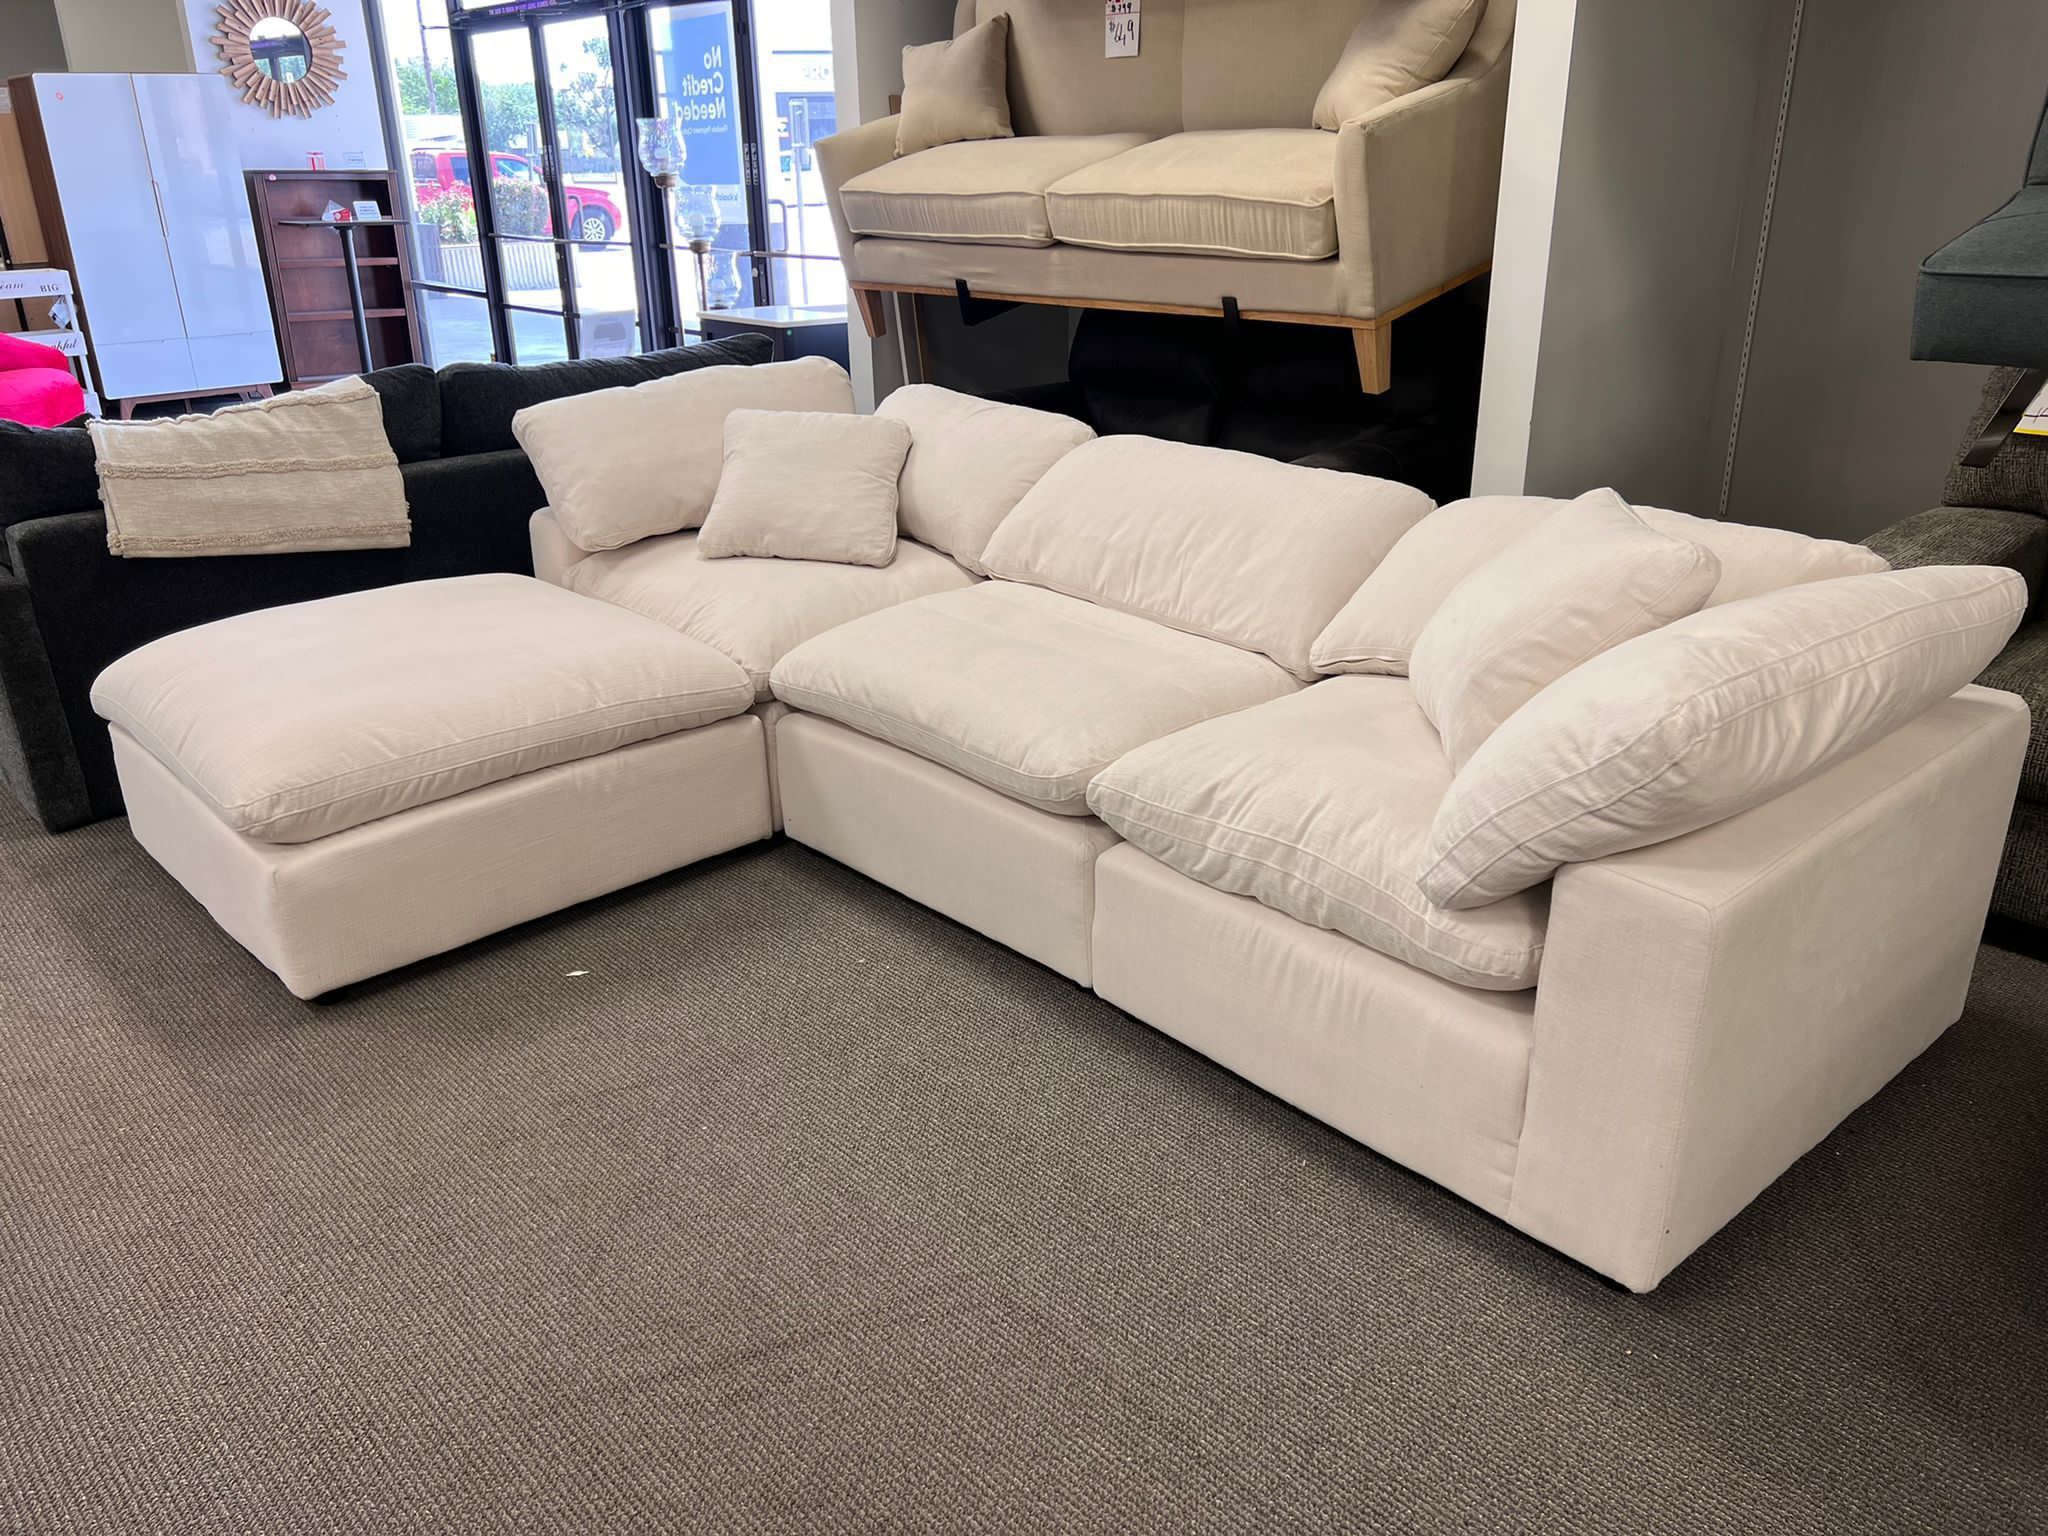 ☁️White Cloud Couch☁️ Free Delivery ✅ 4pc Modular Sectional Sofa In White 